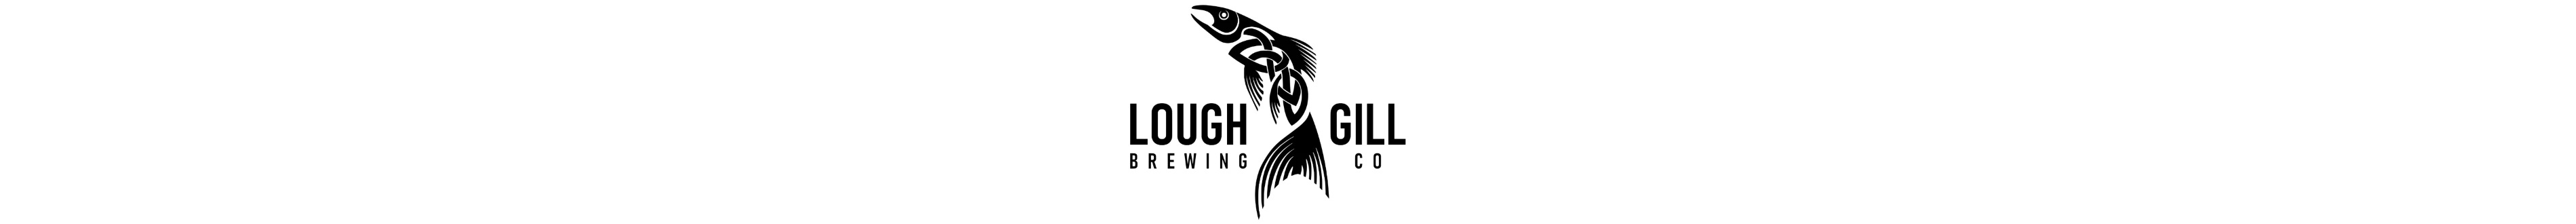 Lough Gill Brewery